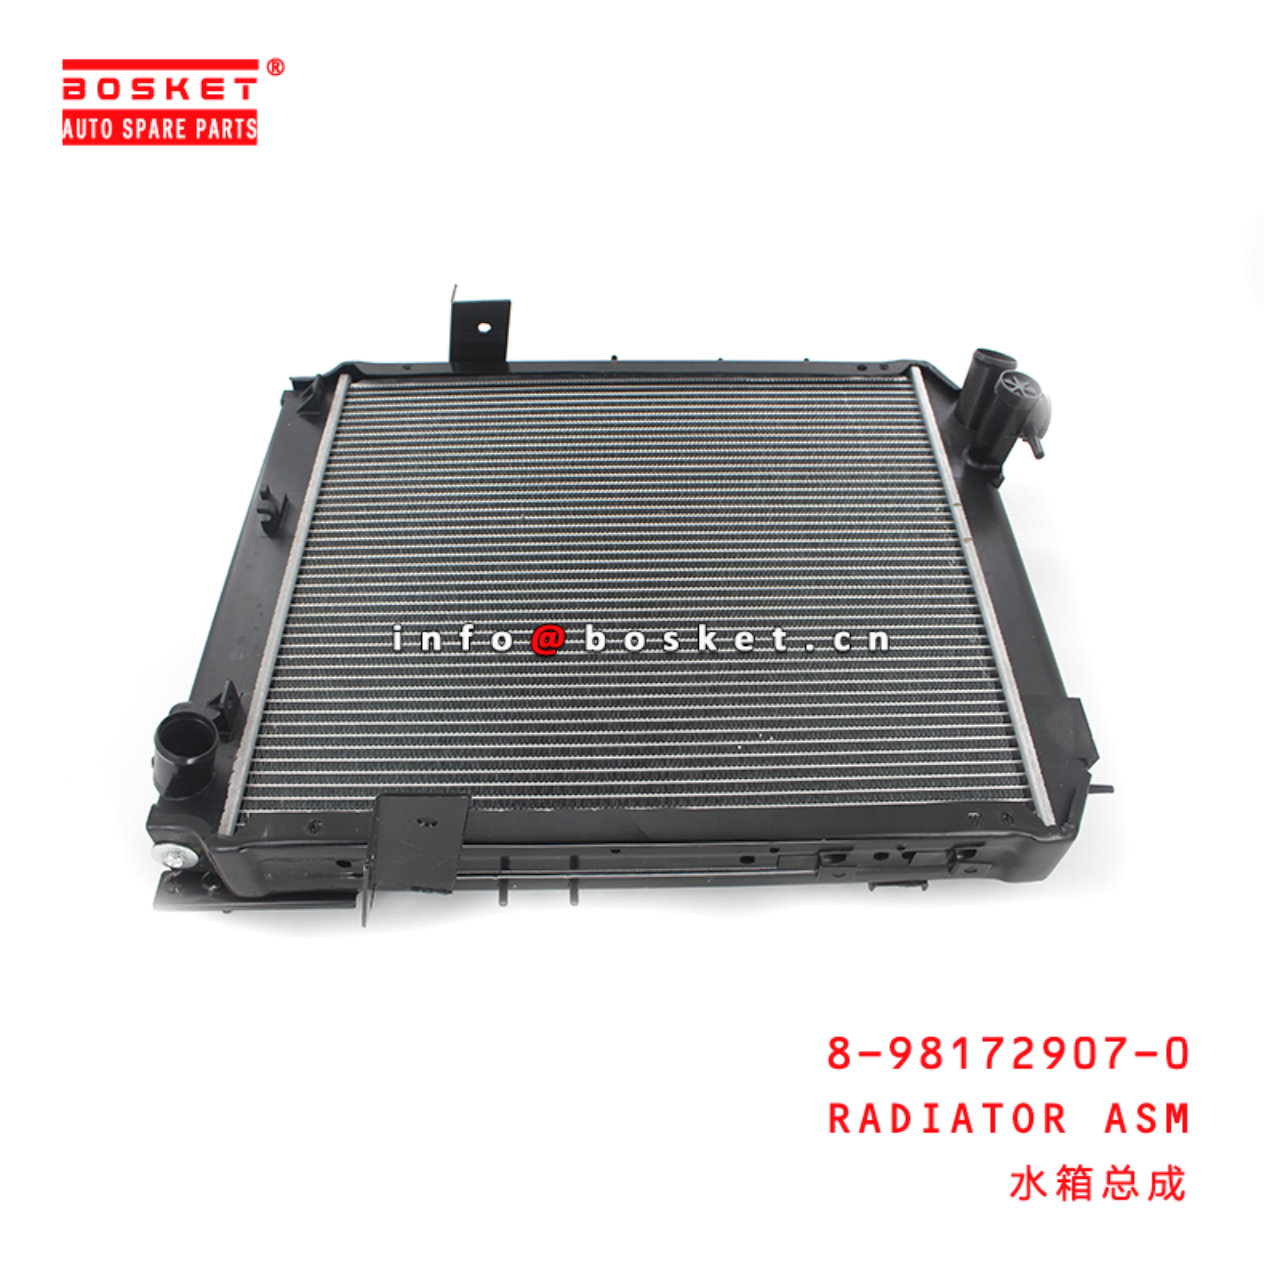 8-98172907-0 Radiator Assembly Suitable for ISUZU 8981729070